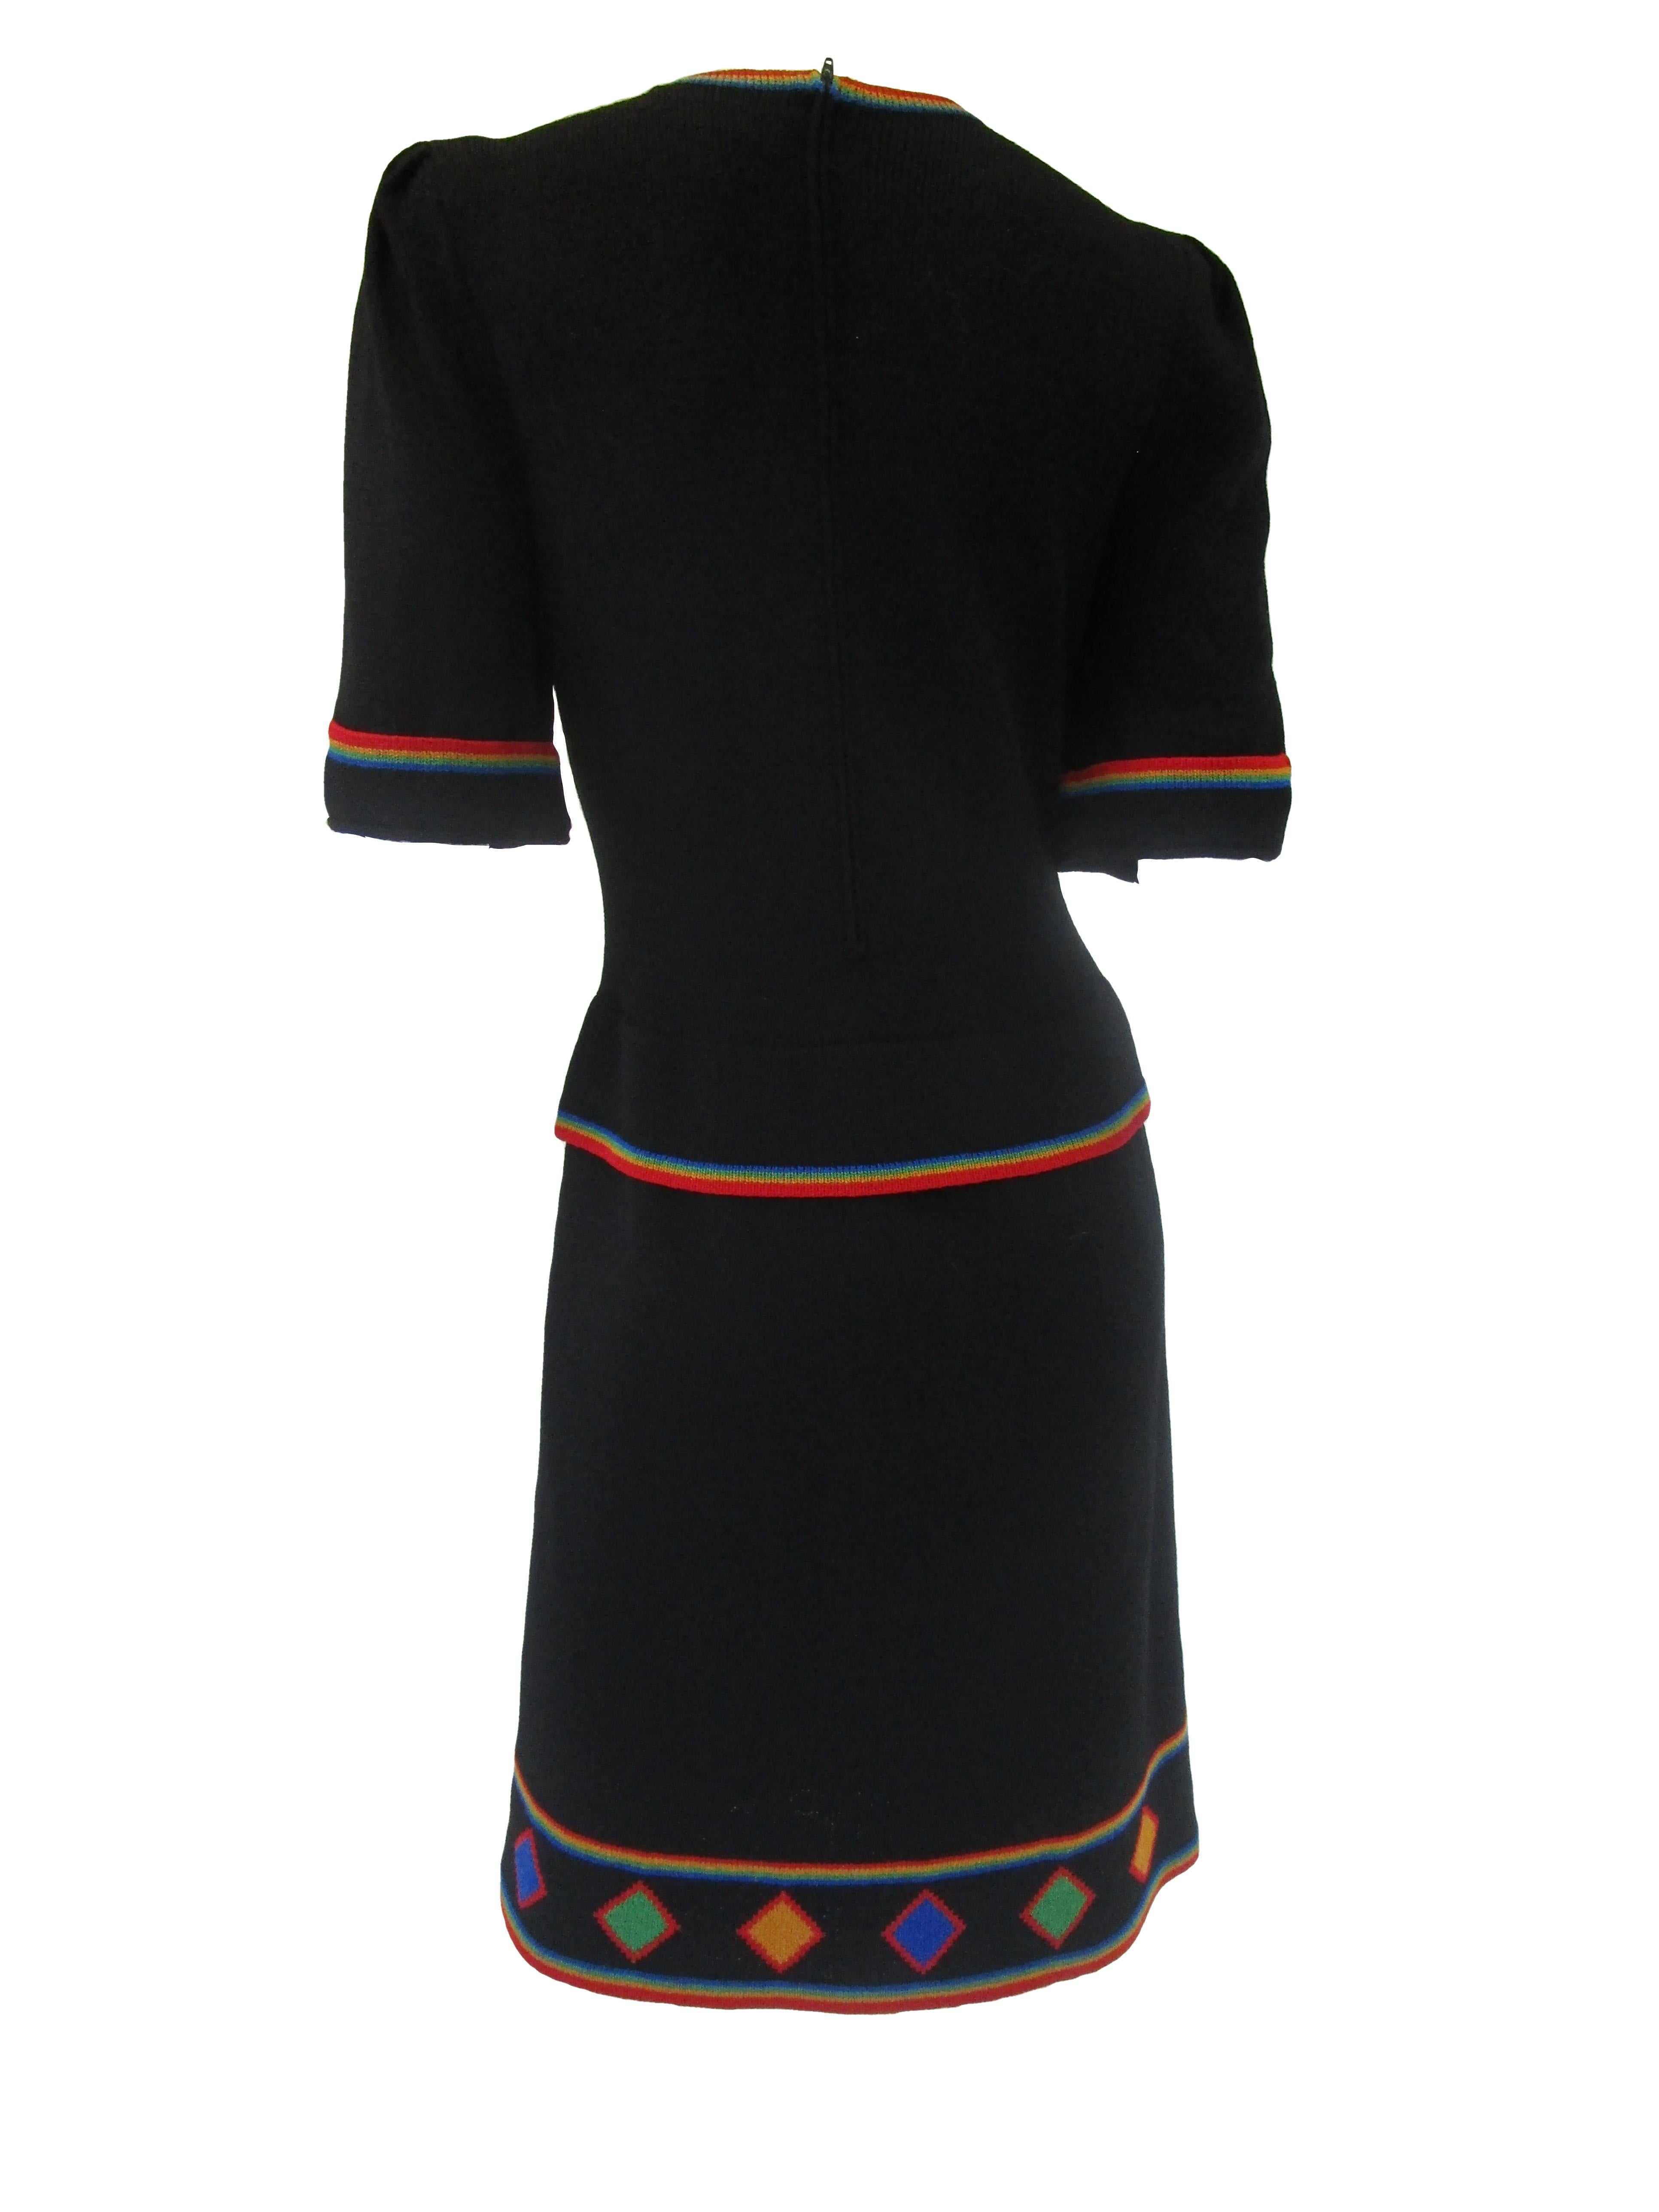 1970s Adolfo Black Knit Dress With Rainbow Details  For Sale 2